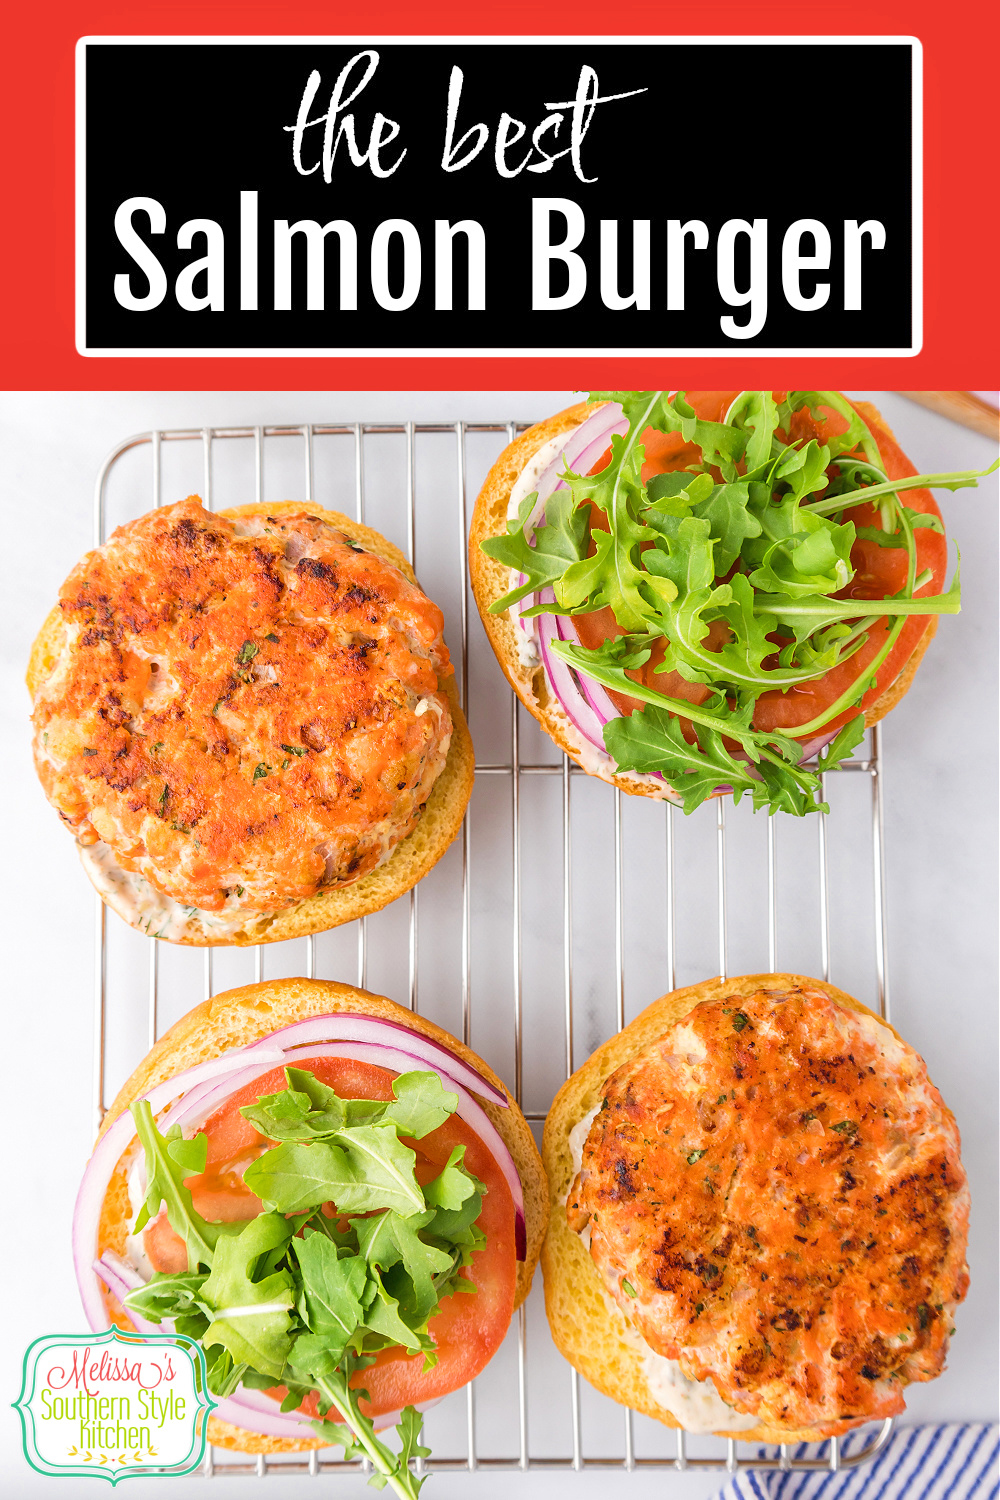 Upgrade your burger menu with this Salmon Burger recipe served on toasted buns with fresh toppings and drizzled with a remoulade sauce. #salmonrecipes #salmonburgers #easyburgerrecipes #grilledsalmon #freshsalmonrecipes